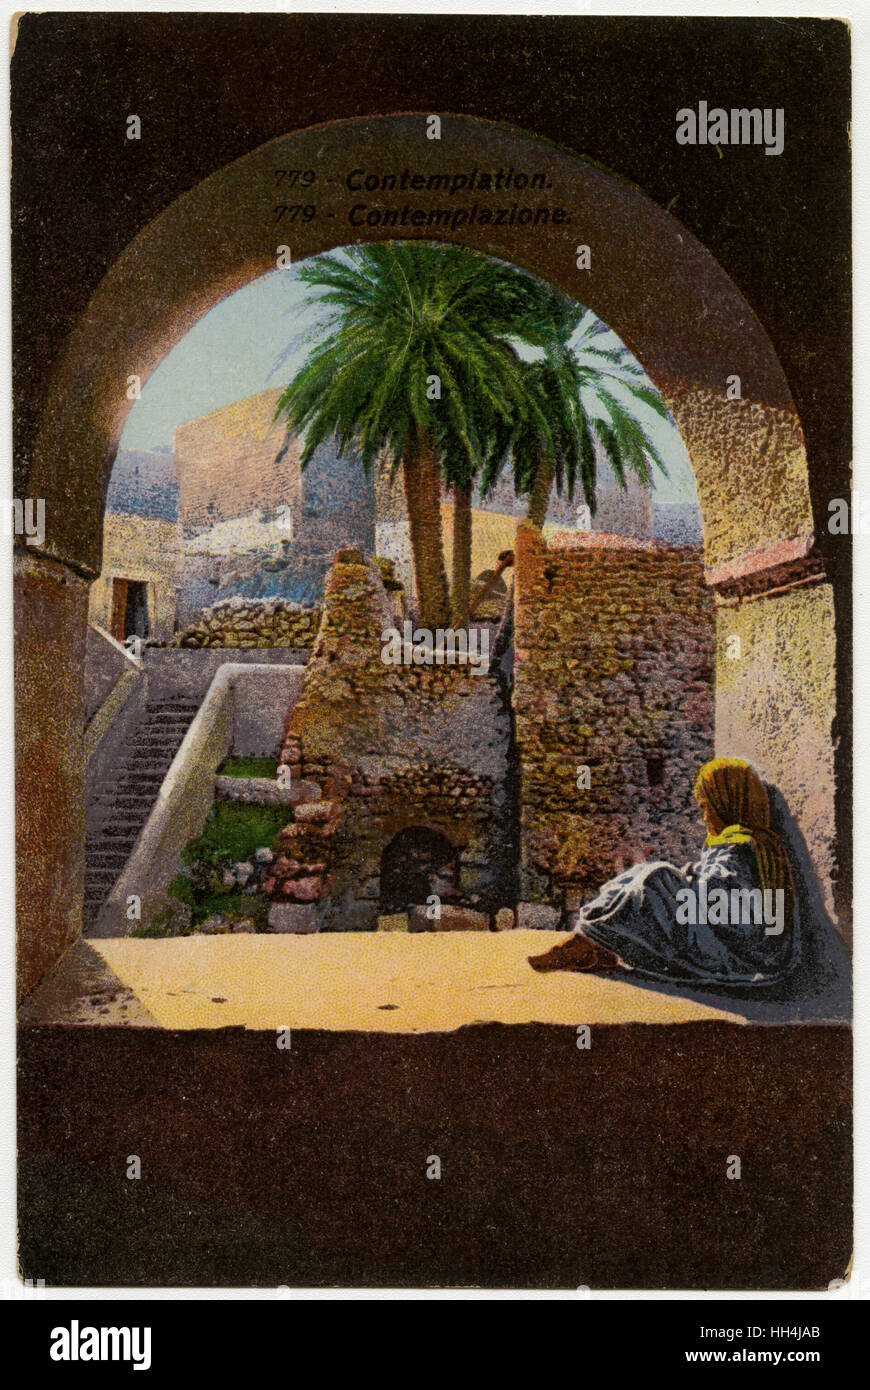 Contemplation - Young child sits beneath an arch - Tunisia Stock Photo